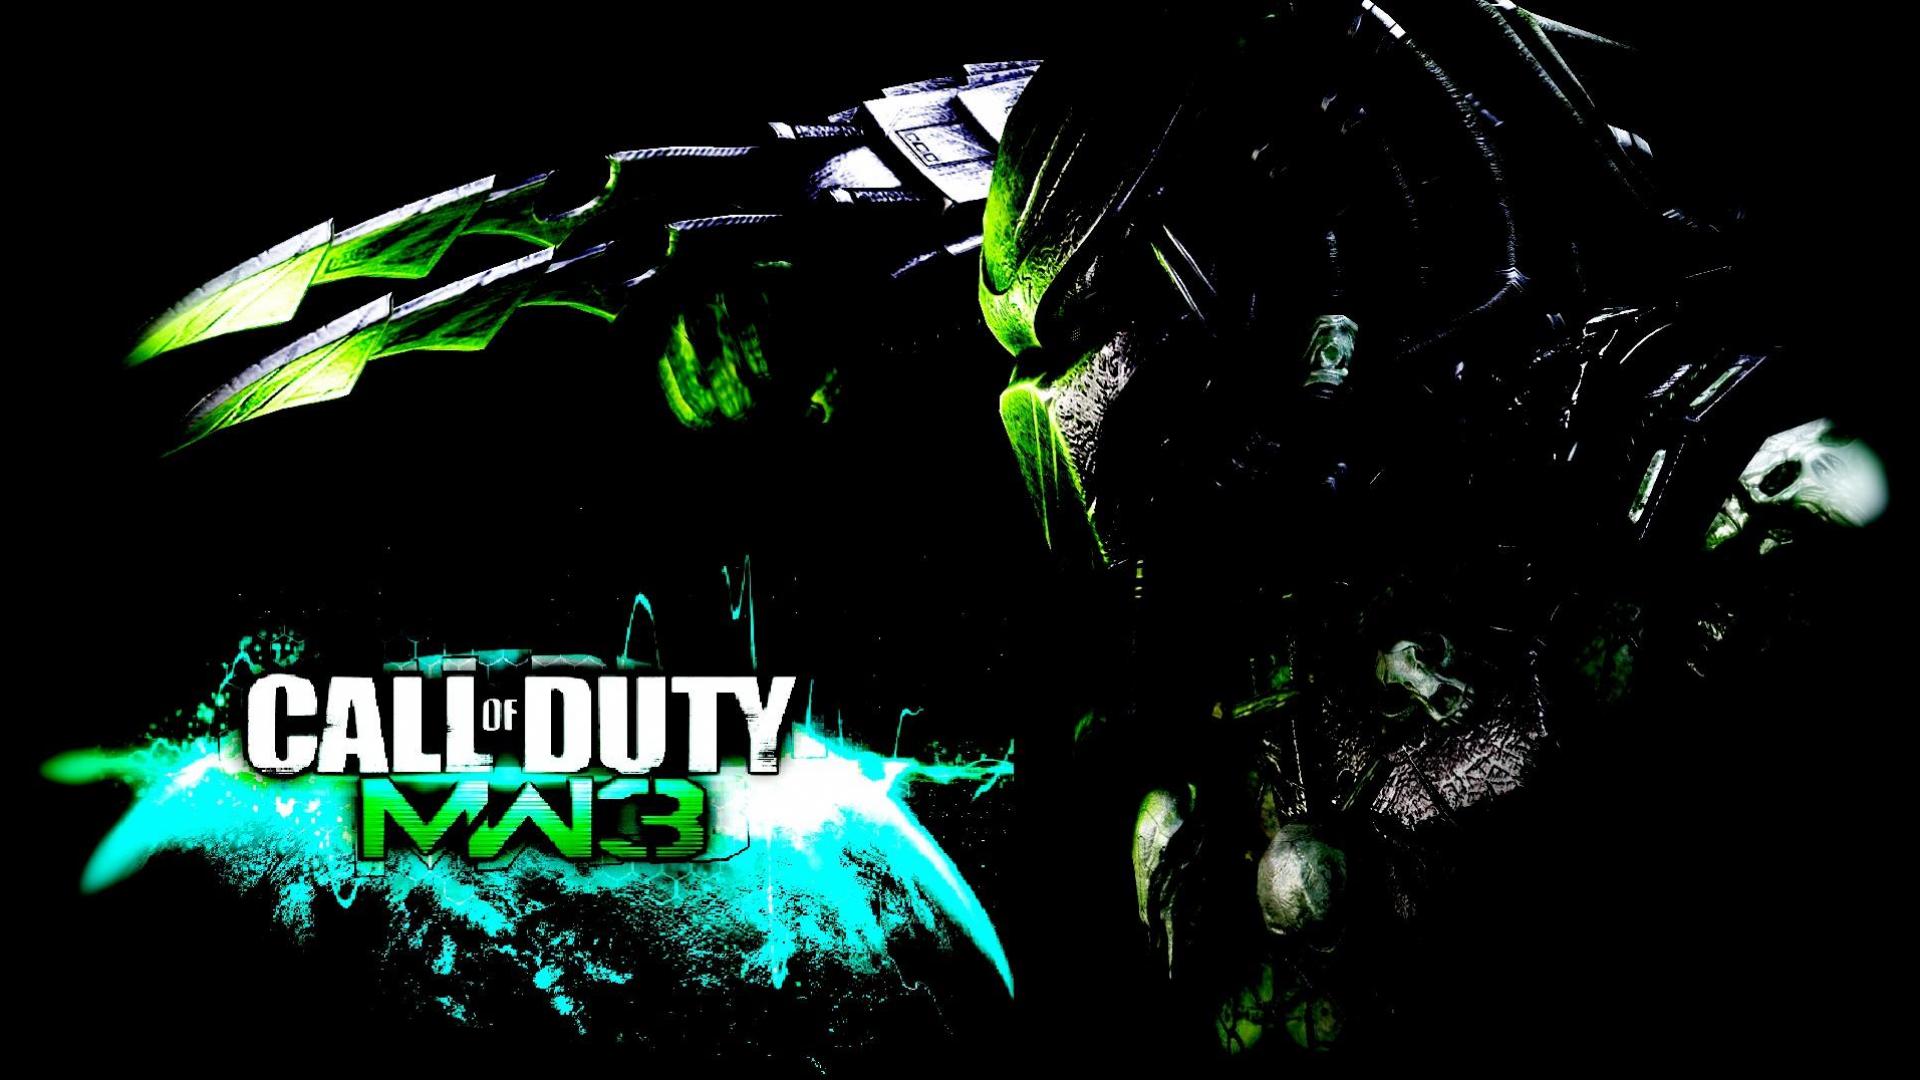 CALL OF DUTY MW3 WALLPAPER - HD Wallpapers